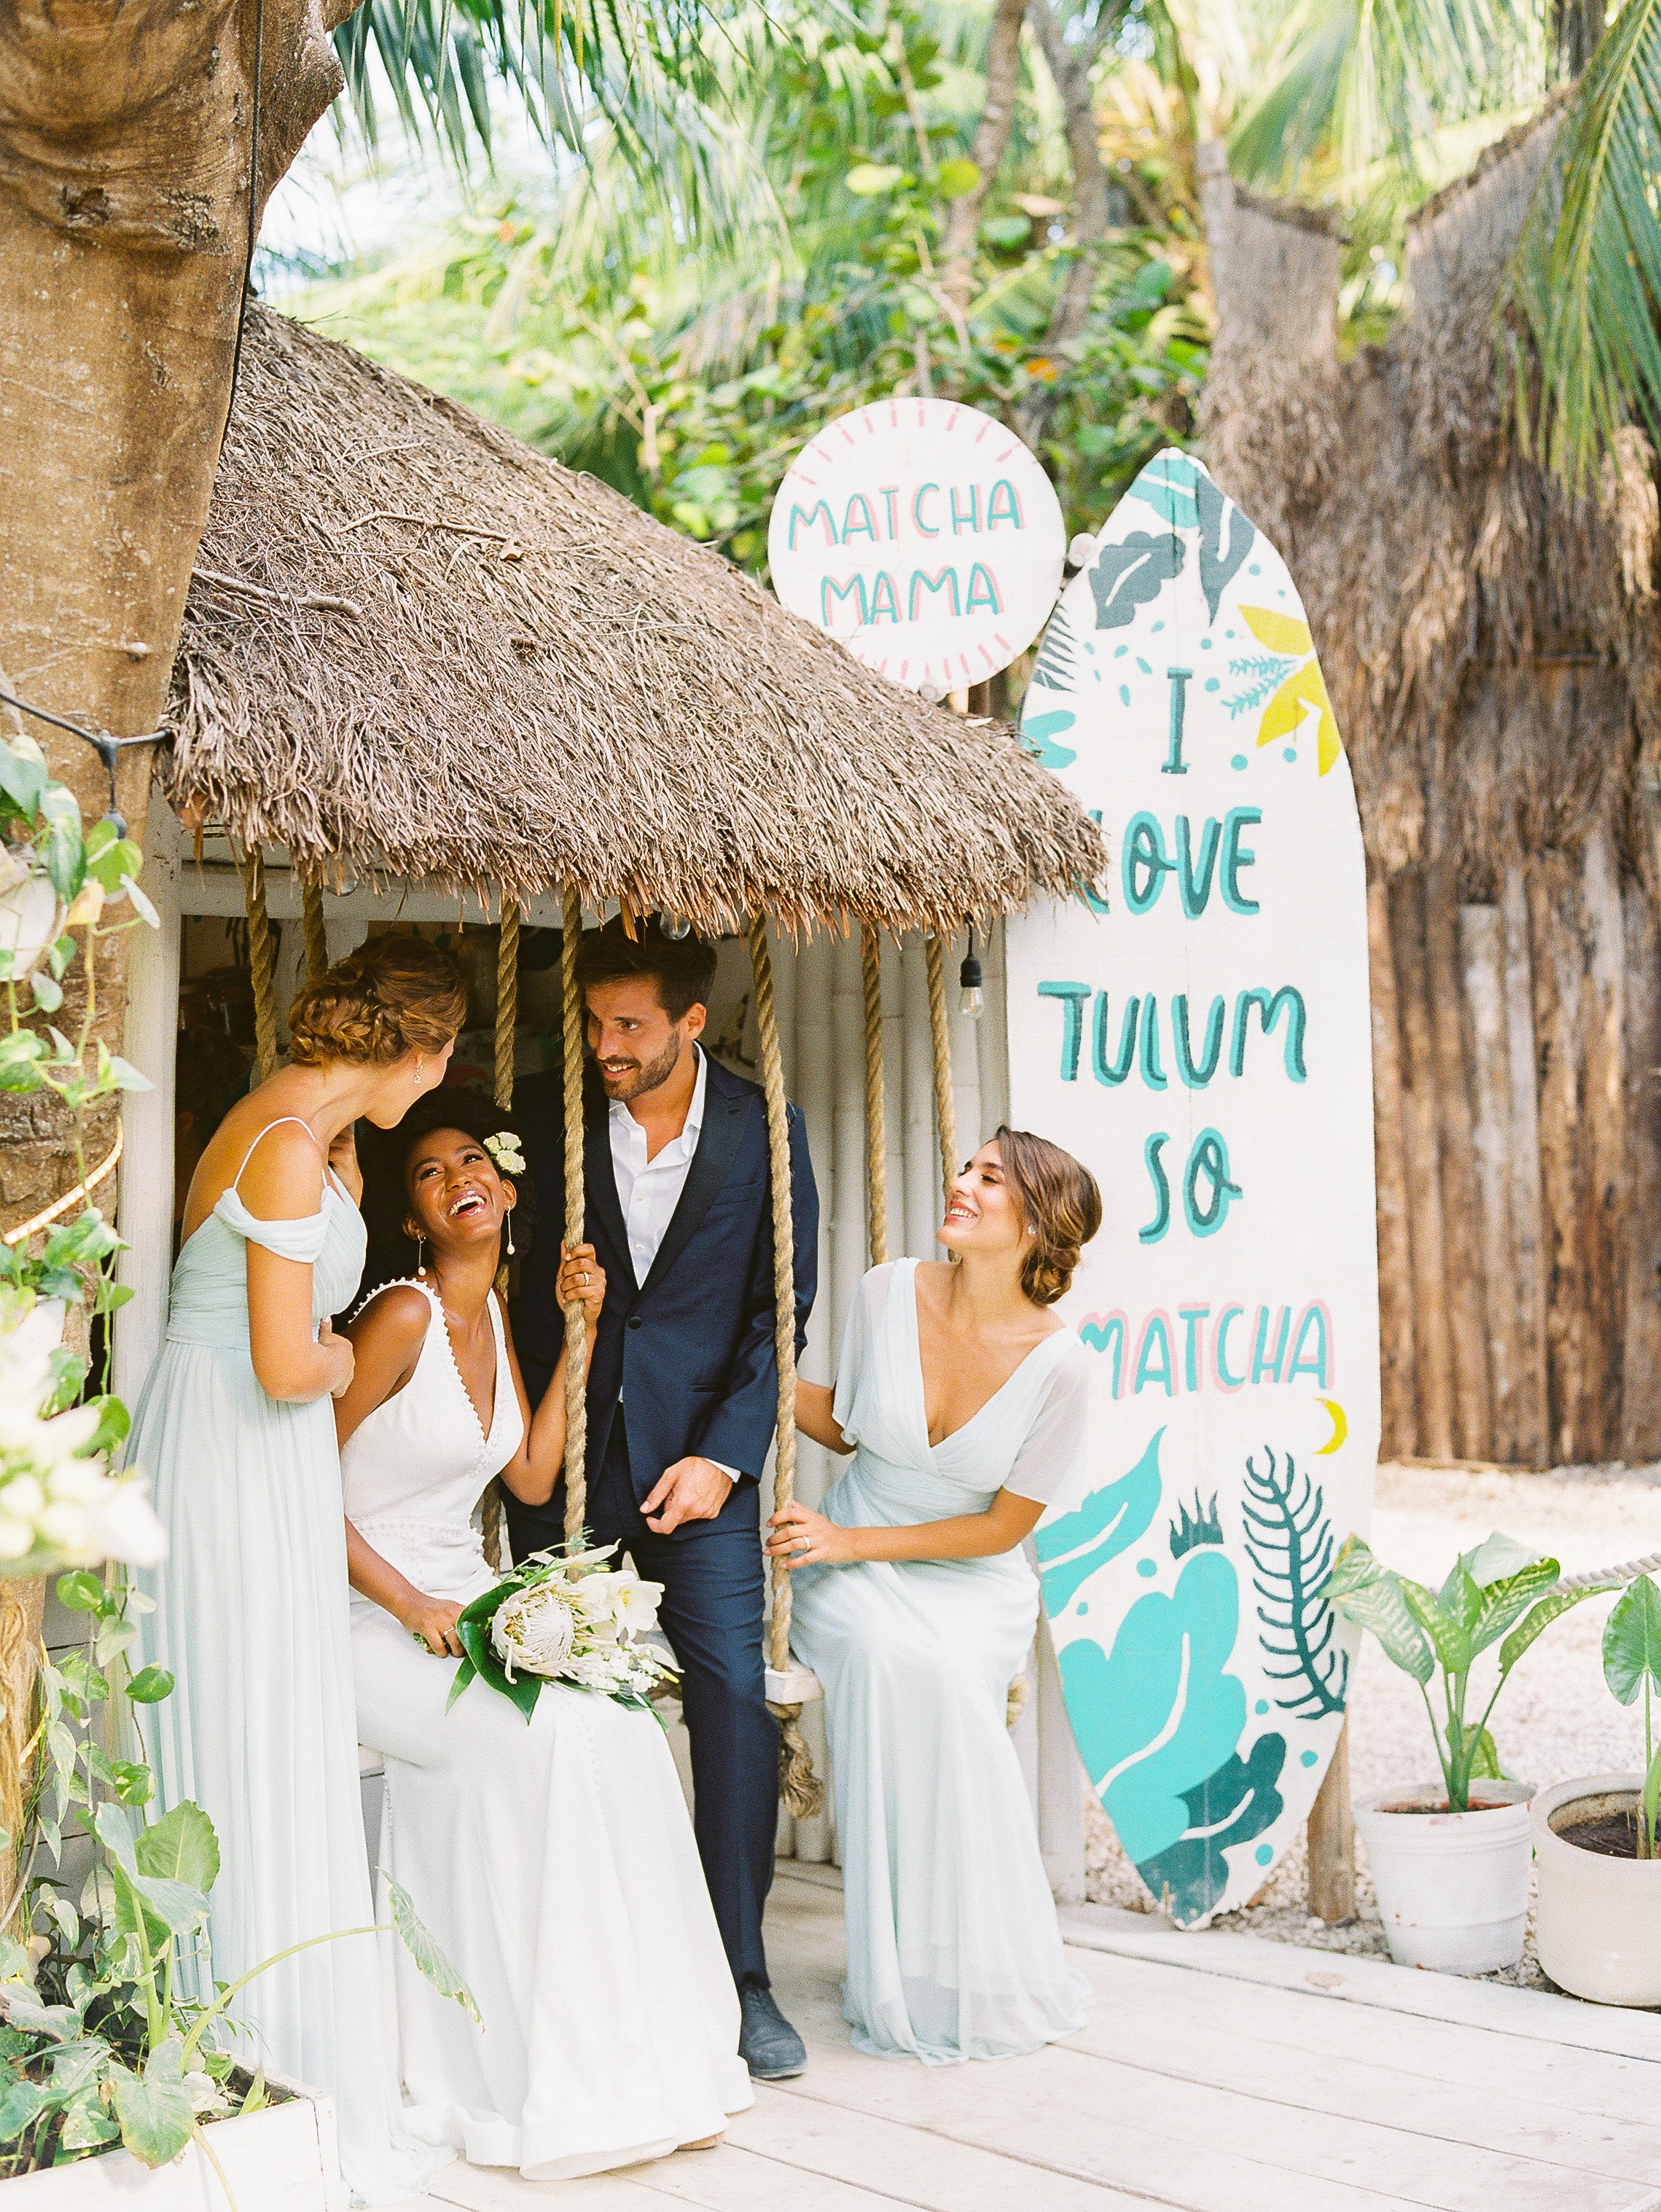 Here are top instagram-worthy moments you must capture on your wedding day! We took Kleinfeld Bridal wedding dresses and Kleinfeld Bridal Party bridesmaids dresses to Tulum, Mexico for a fun photoshoot on the beach full of flowers, sun, sand and fun!